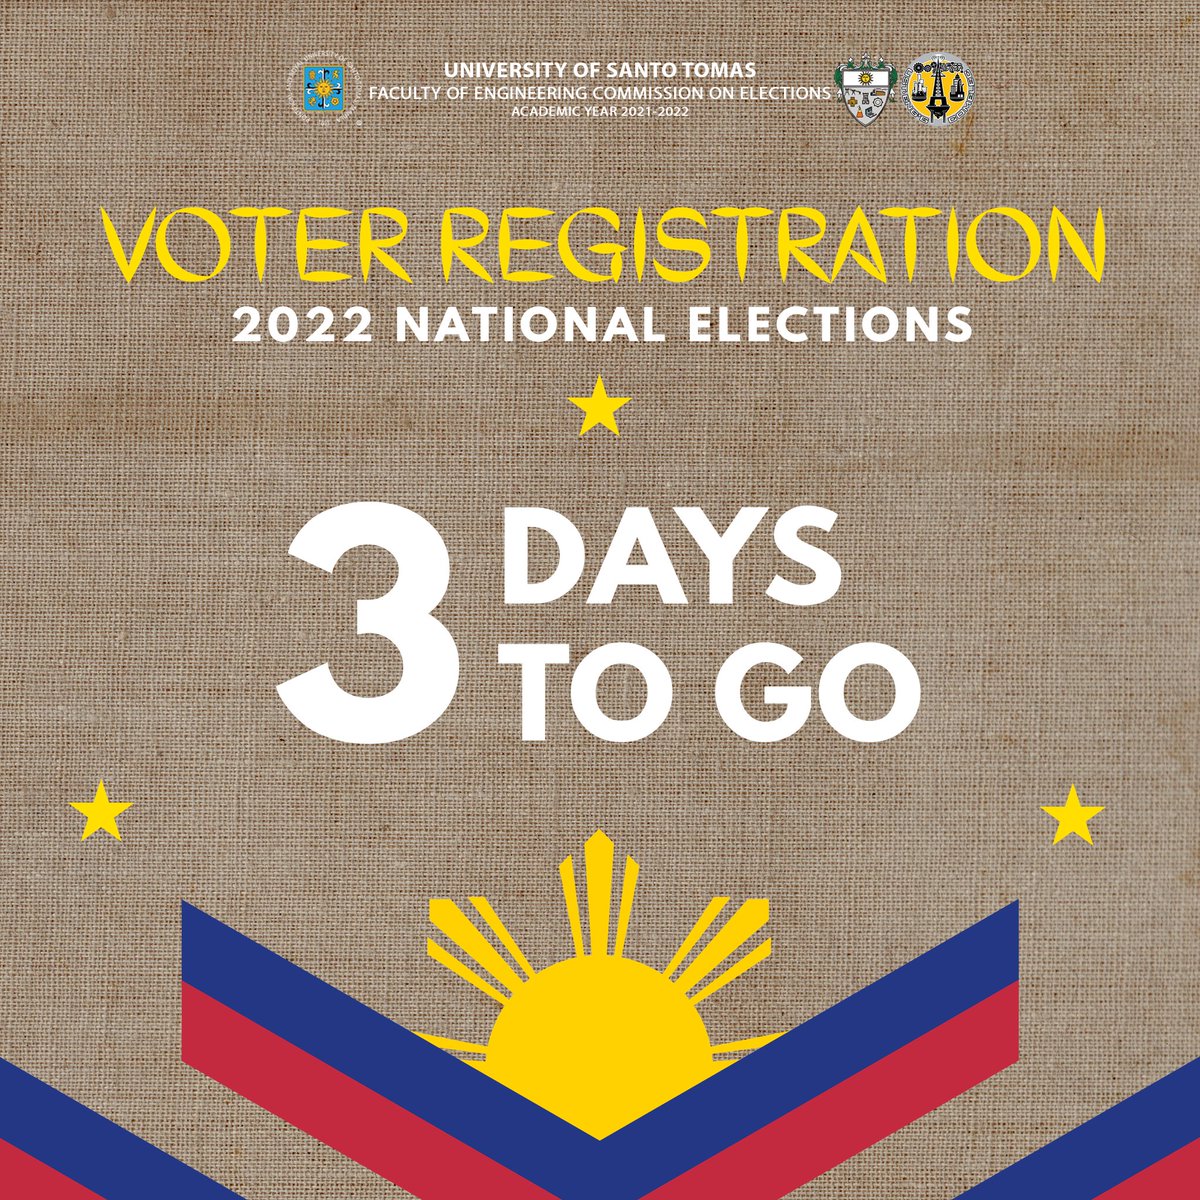 3 DAYS TO GO before the last day of voter registration!

Let's make the #2022NLE count by being part of the next generation's shout for change.
Register to vote by visiting your local COMELEC office now!

#MagpaRehistroKa
#USTEnggSeasonsOfLeadership https://t.co/4WVmnb3QZe.